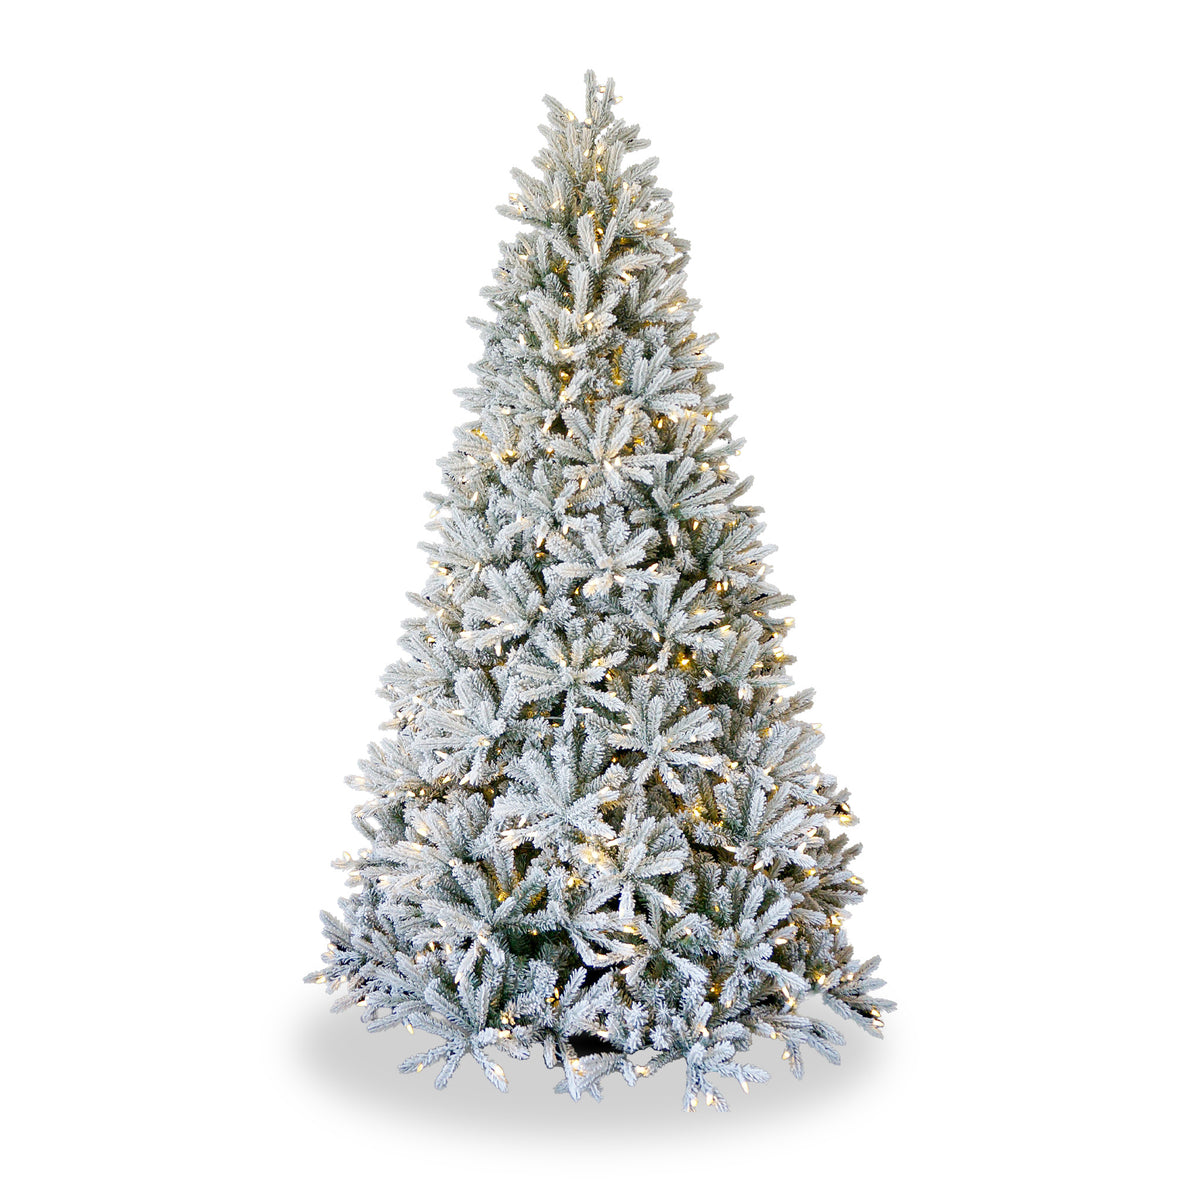 Snowy St Petersburg Fir Warm White LED 7.5ft Christmas Tree from Roseland